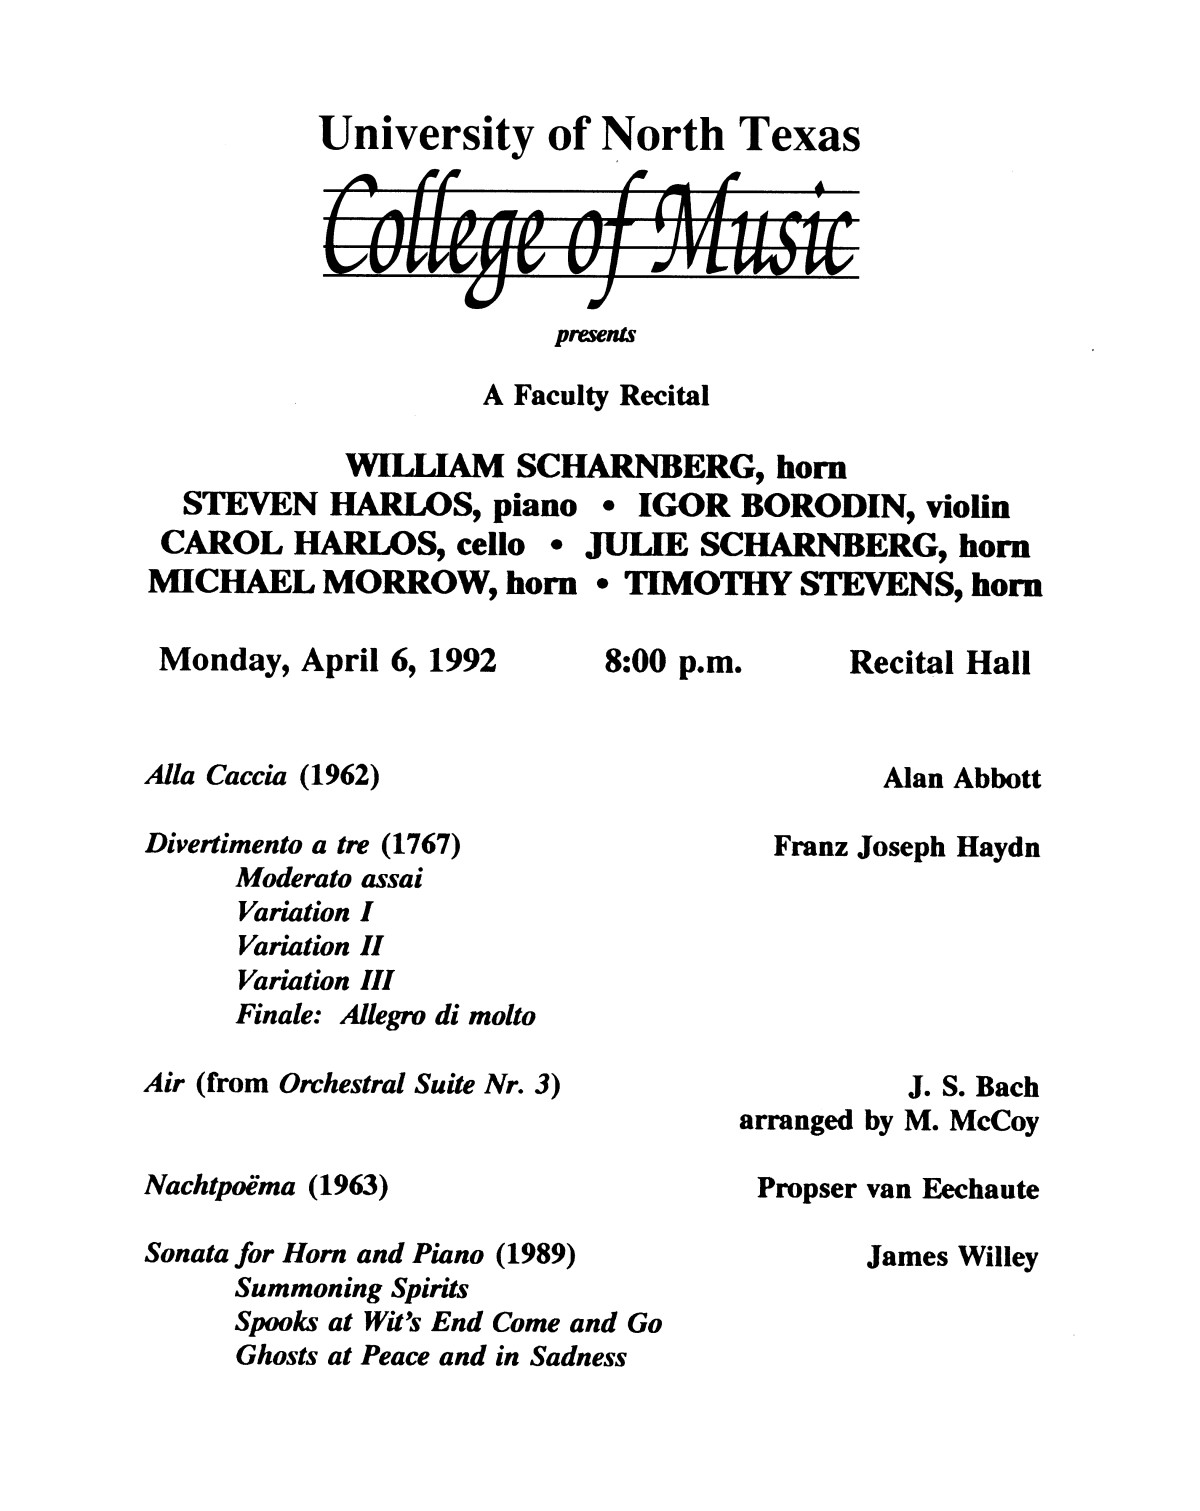 College of Music program book 1991-1992 Student Performances Vol. 2
                                                
                                                    [Sequence #]: 156 of 310
                                                